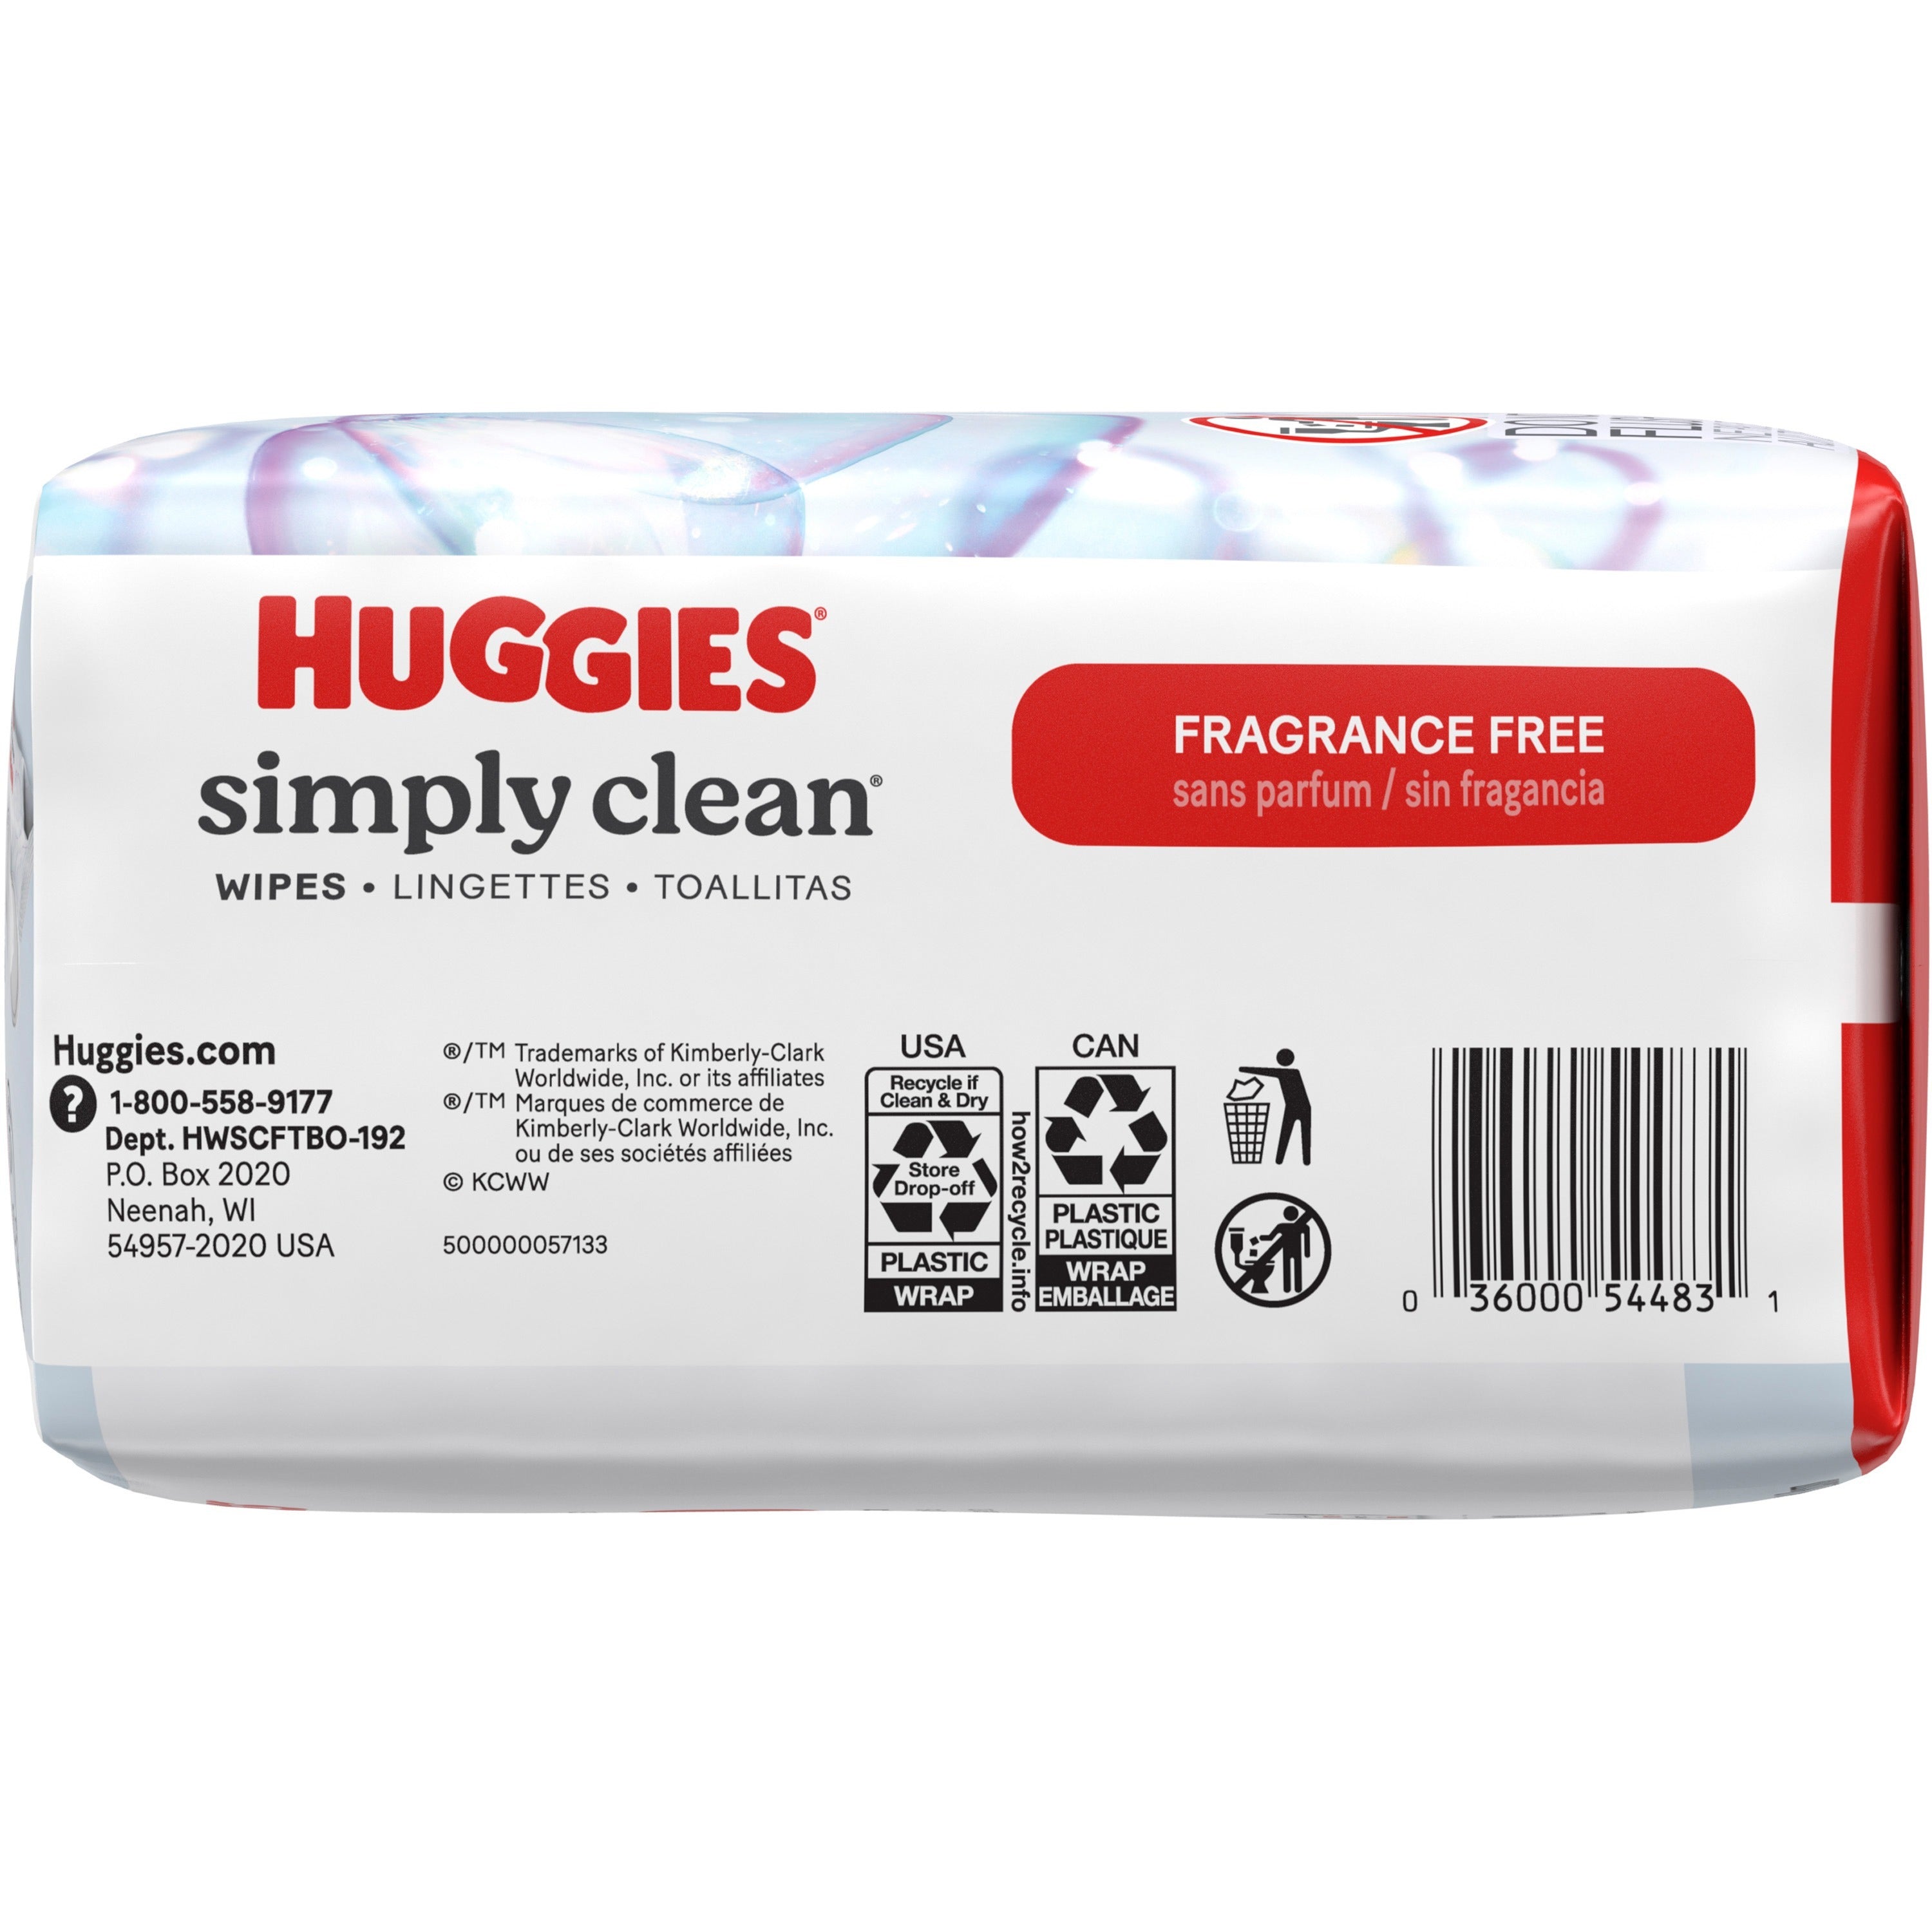 huggies-simply-clean-wipes-white-unscented-hypoallergenic-ph-balanced-fragrance-free-alcohol-free-paraben-free-phenoxyethanol-free-for-hand-skin-face-1-each_kcc54483 - 2